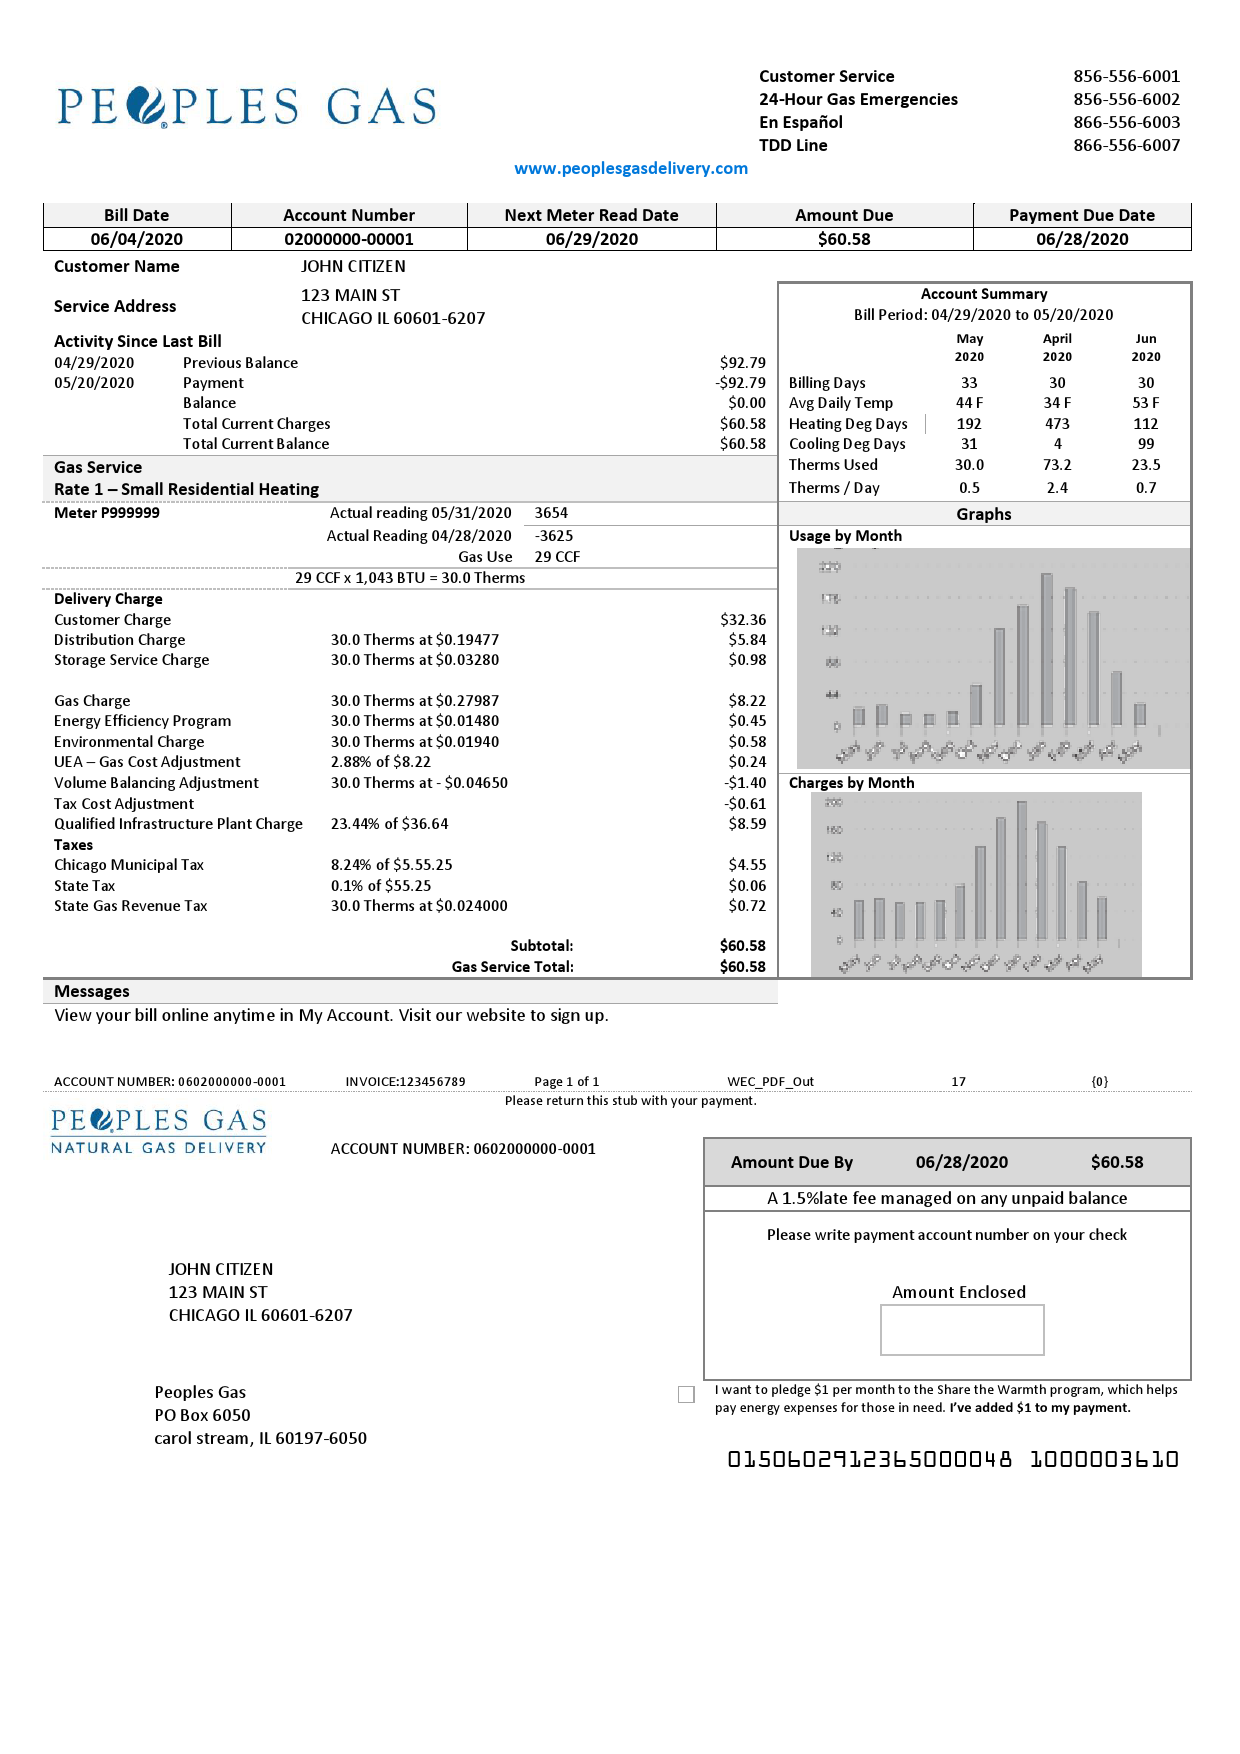 USA Illinois Peoples Gas utility bill template in Word and PDF format